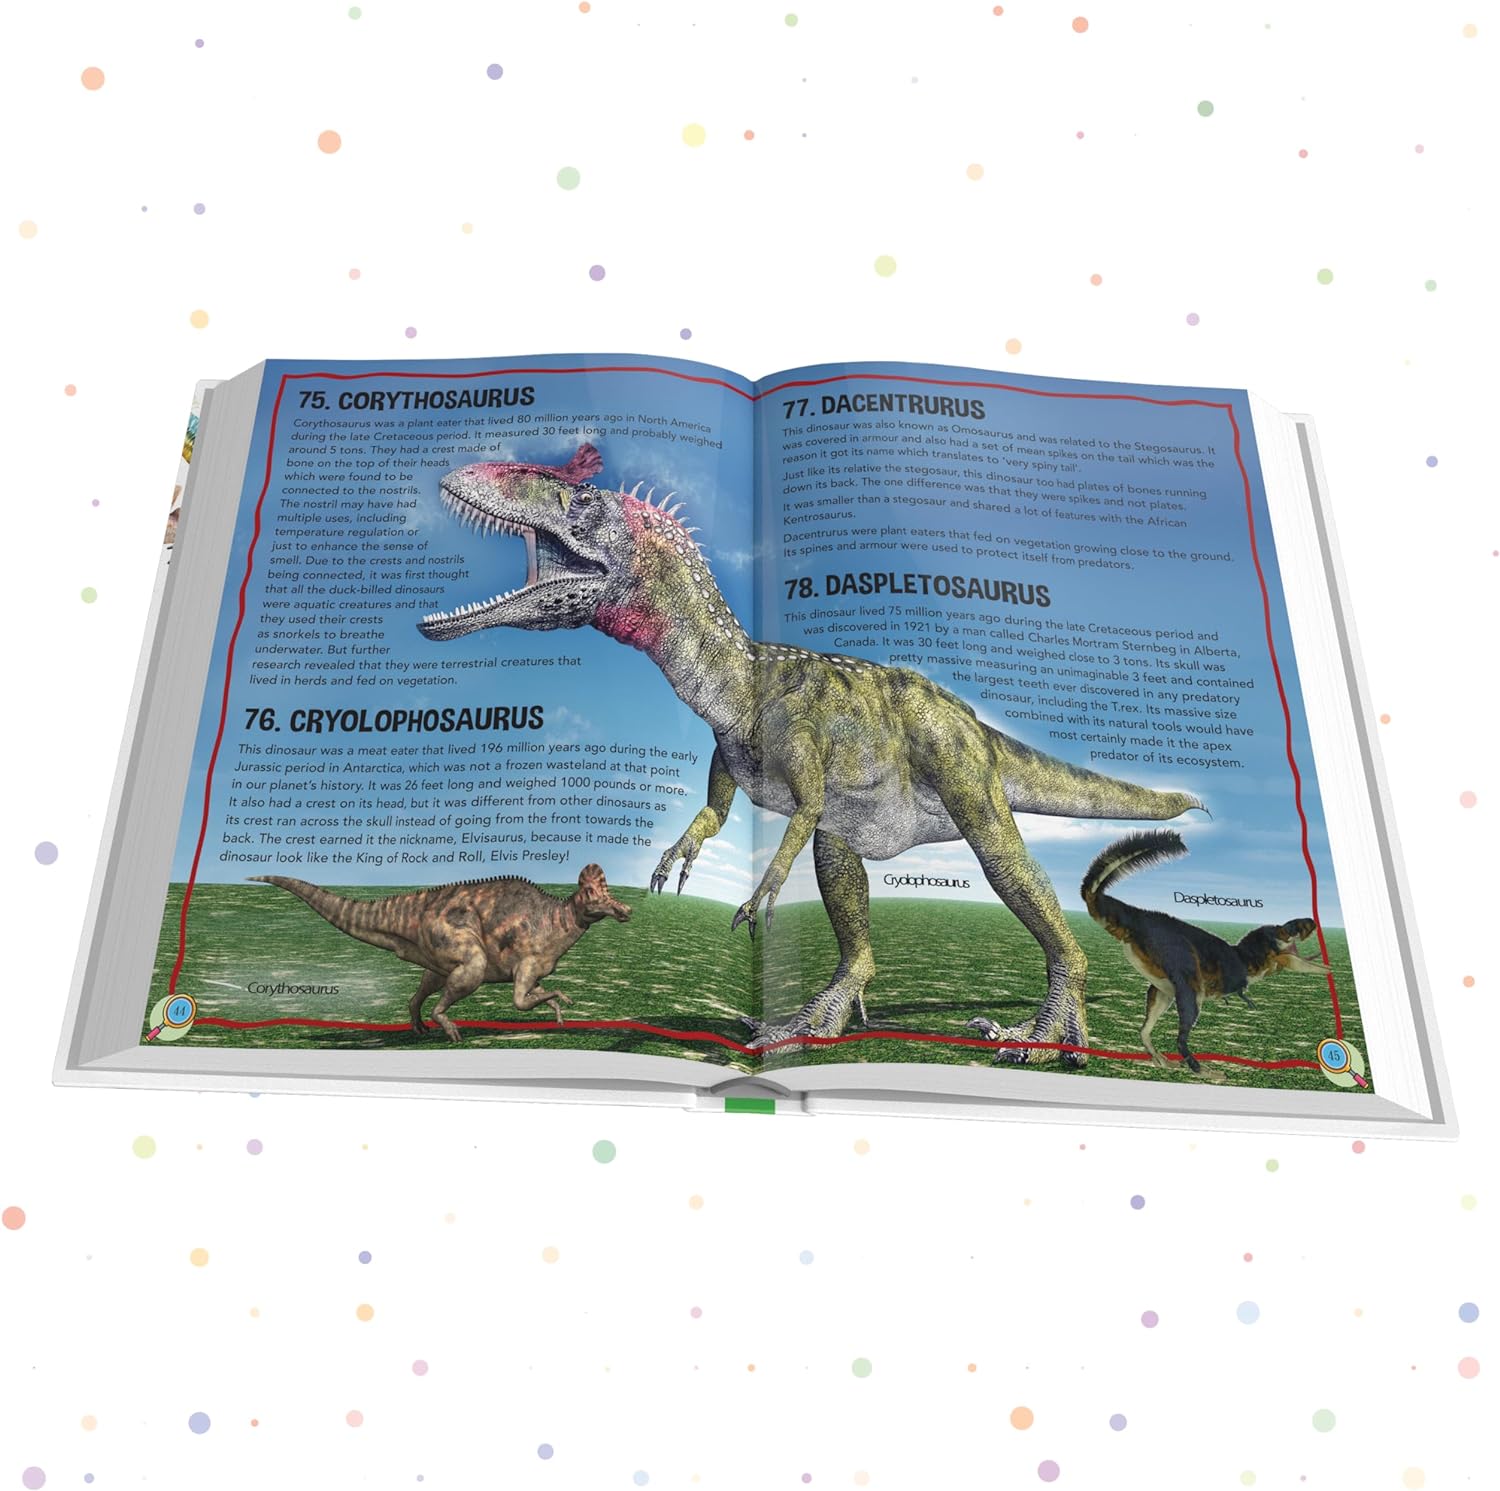 Pegasus 365 Dinosaurs - Premium Quality Padded & Glittered Book for Kids Ages 6+